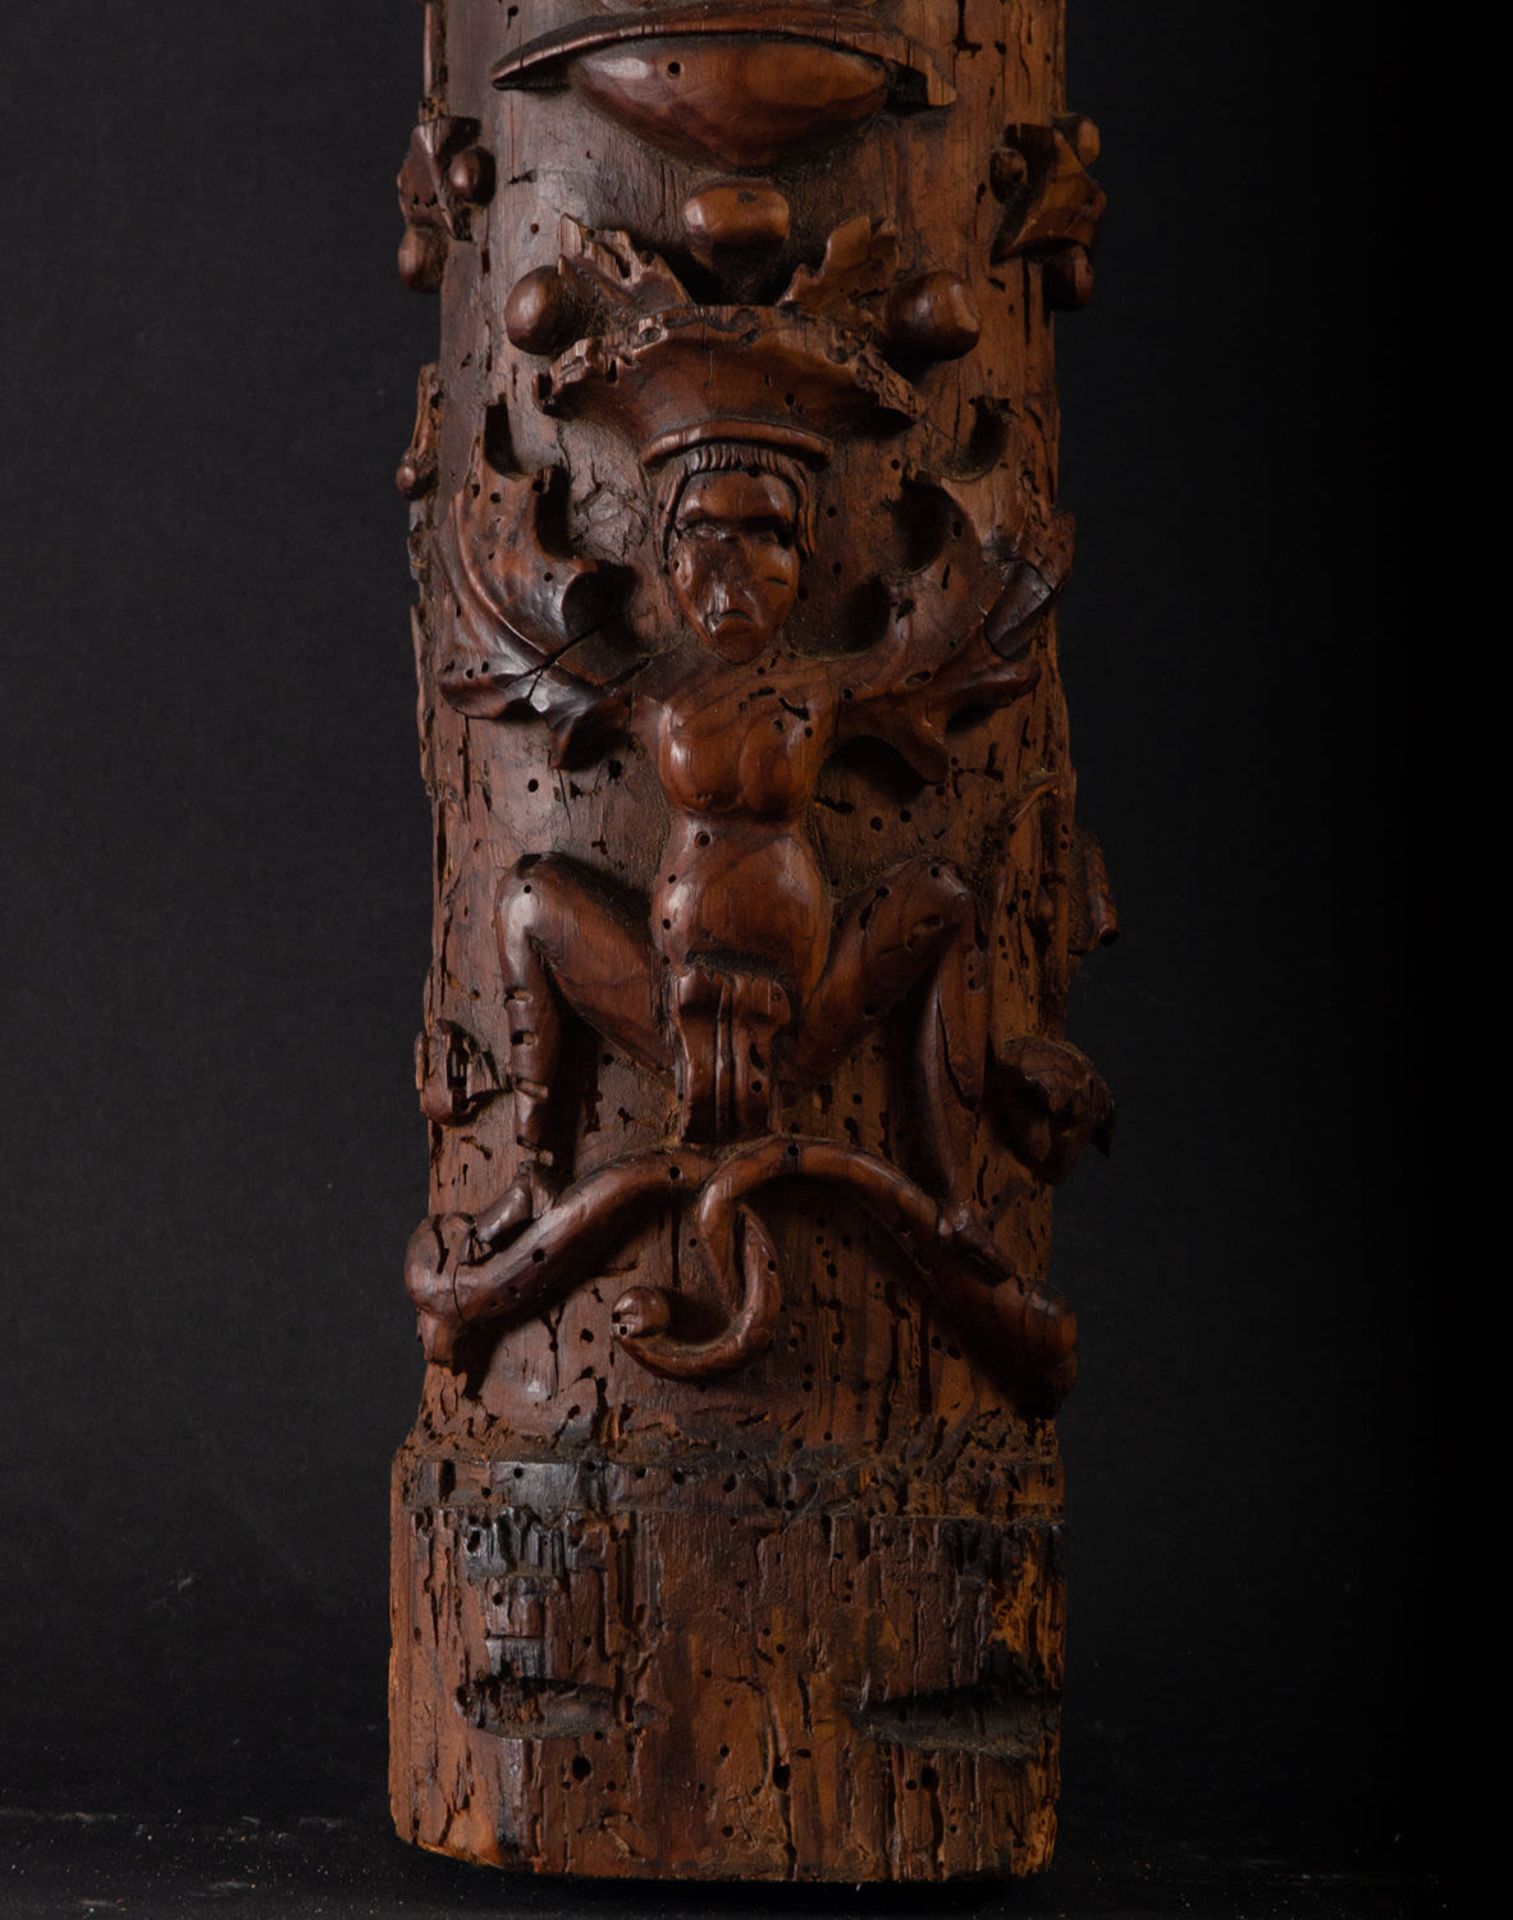 Plateresque column or Pilaster in pinewood, Spanish Renaissance work from the 16th century - Image 5 of 5